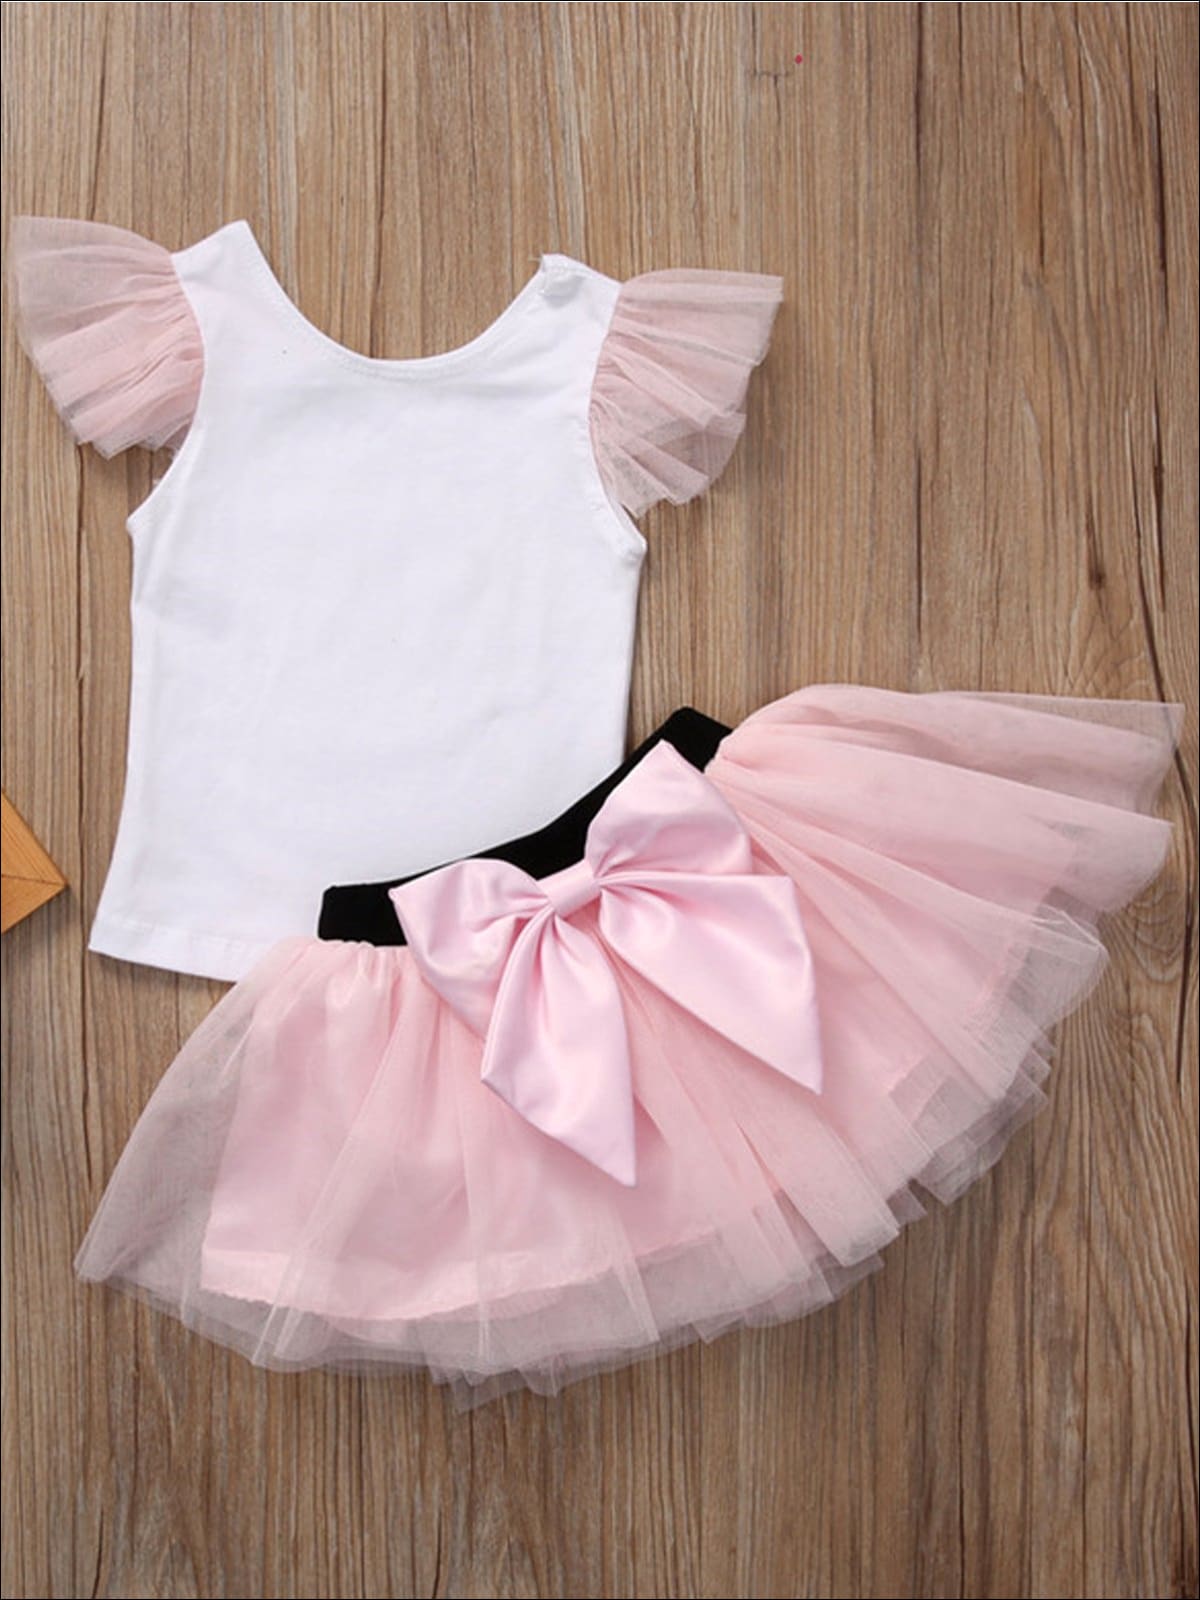 Mommy & Me Matching Spring Tutu Dress - White & Pink / S - Mommy & Me Dress